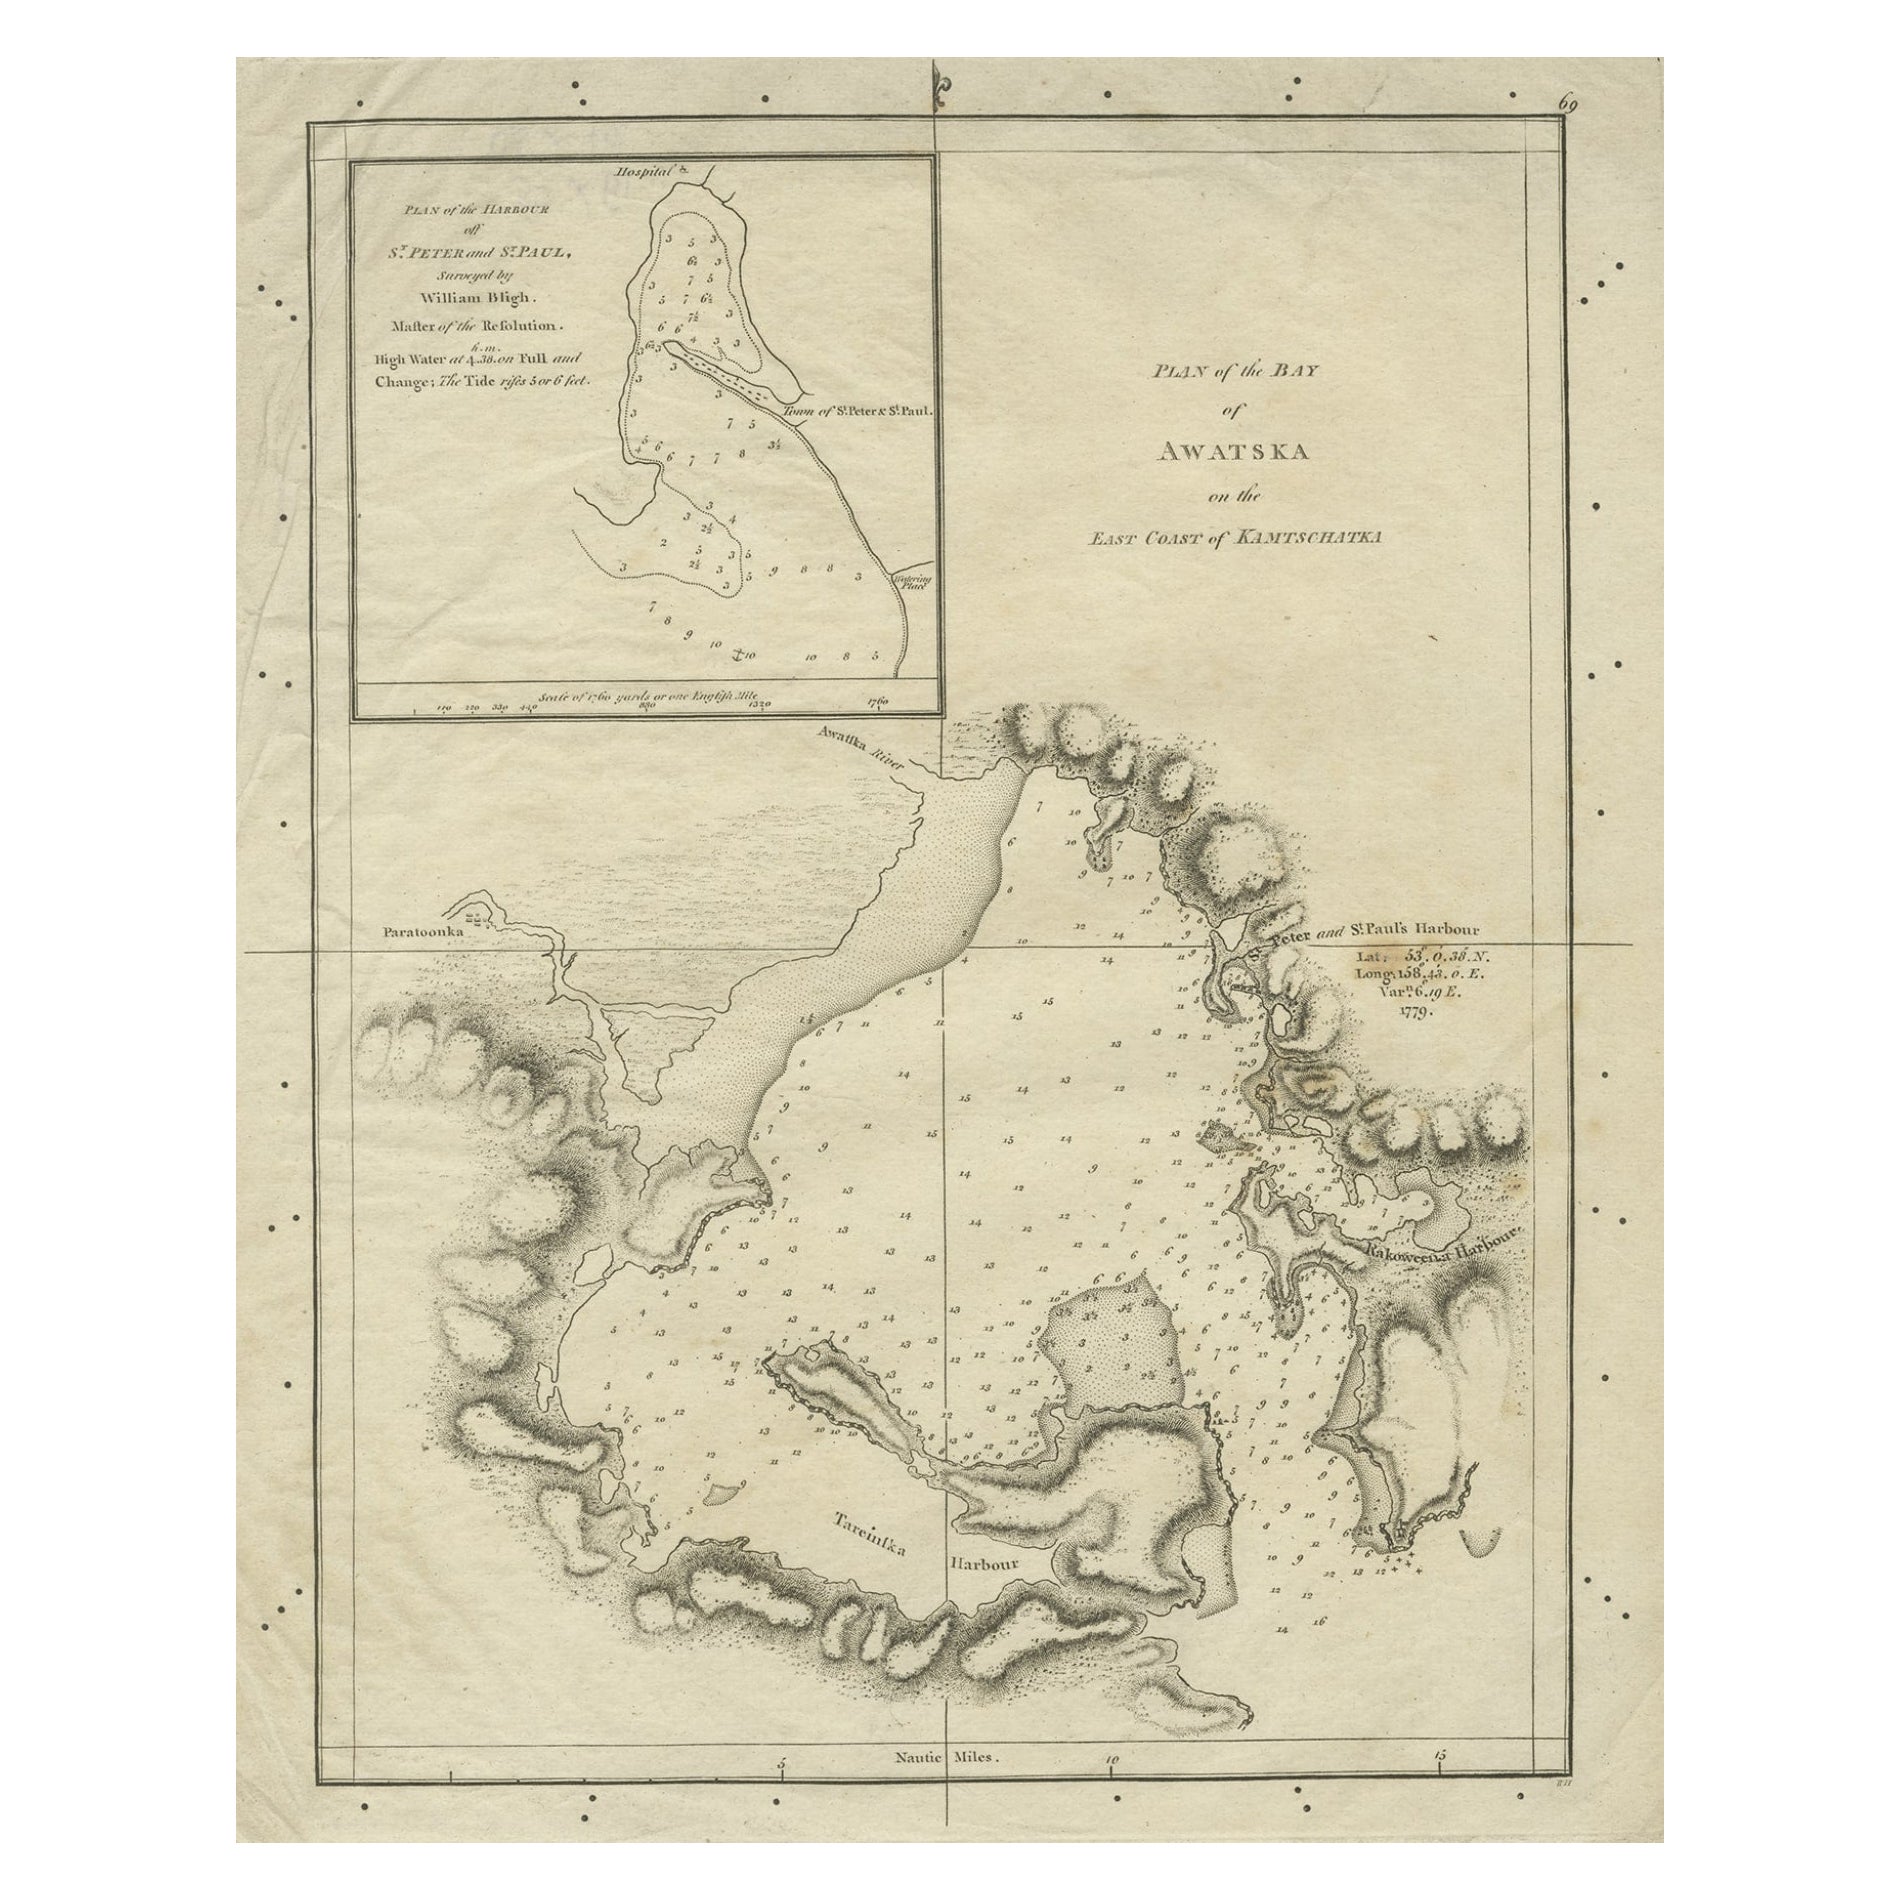 Old Map of Awatska Bay on the Coast of Kamchatka Peninsula, Russia by Cook, 1784 For Sale